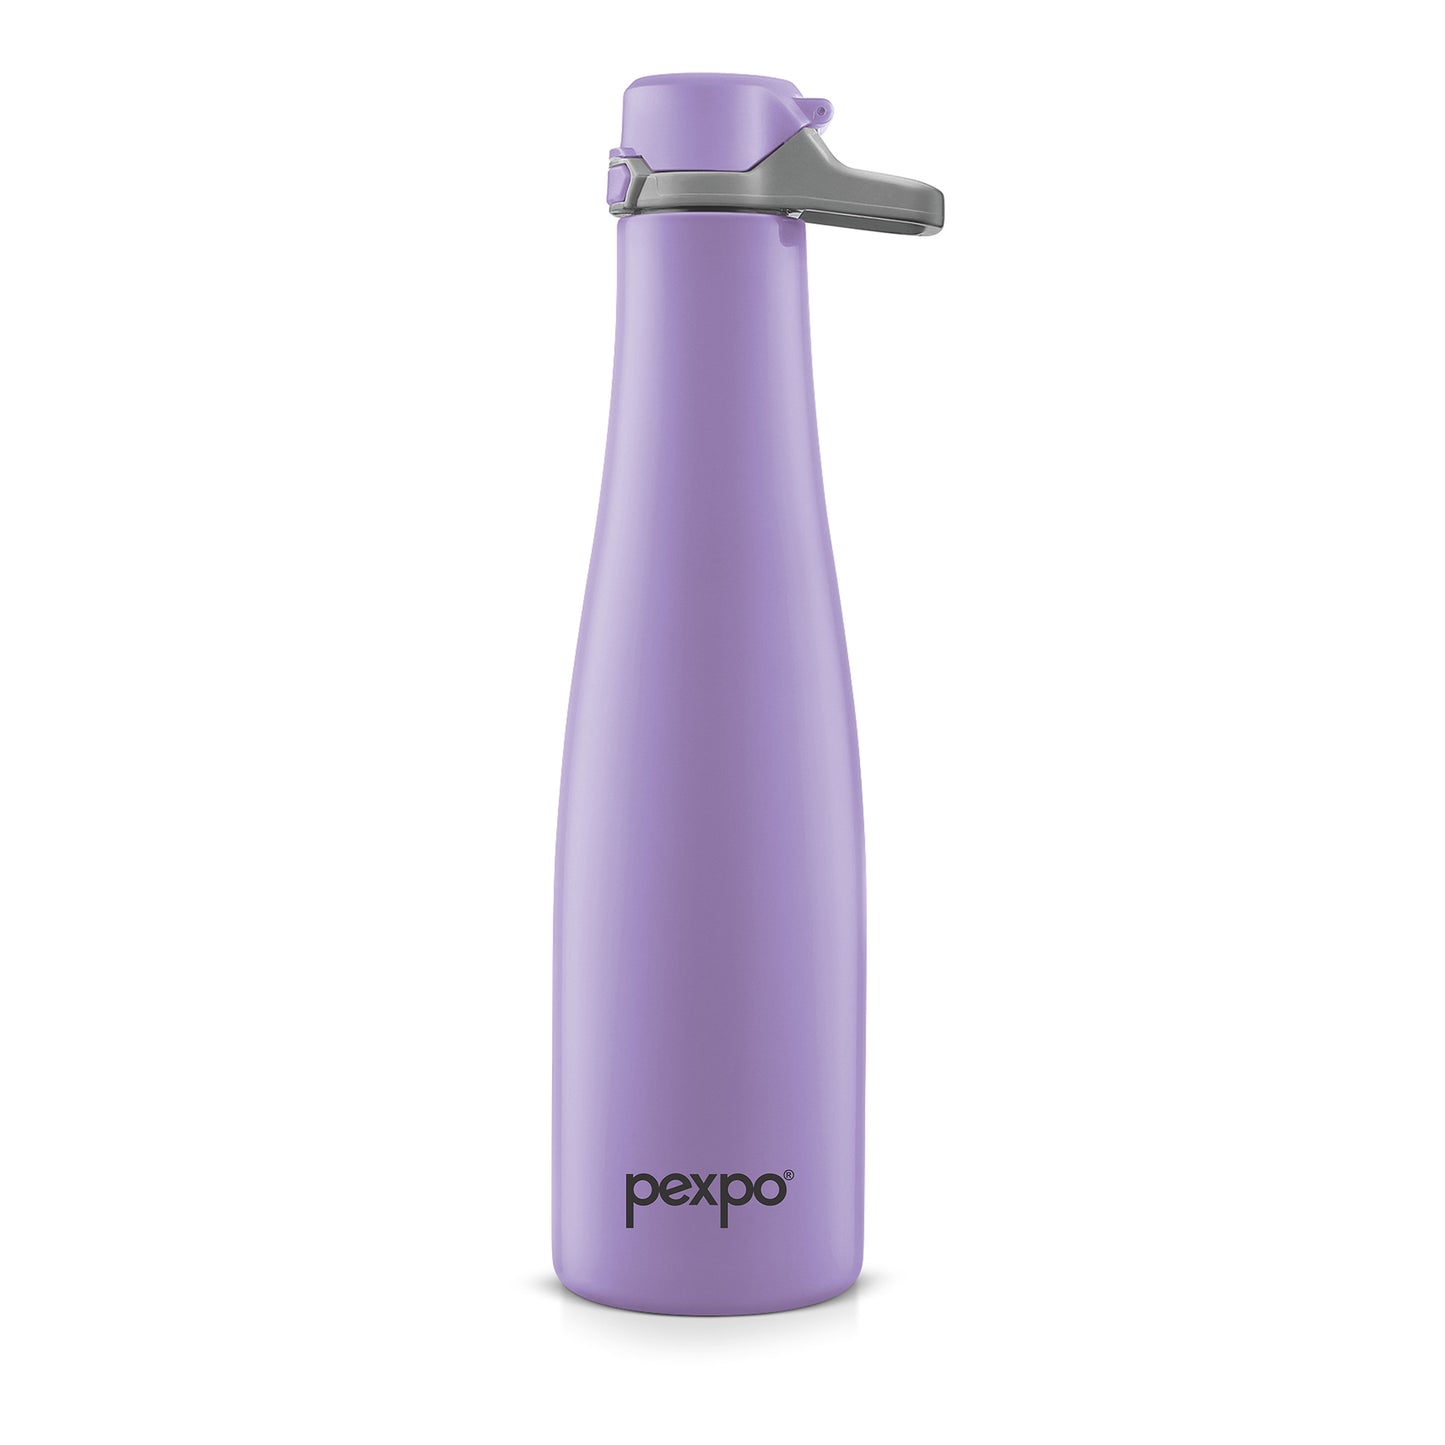 Pexpo Mayo- Stainless Steel Hot and Cold Vacuum Insulated Flask | Lightweight & Keeps Drinks Hot/Cold for 24+ Hours